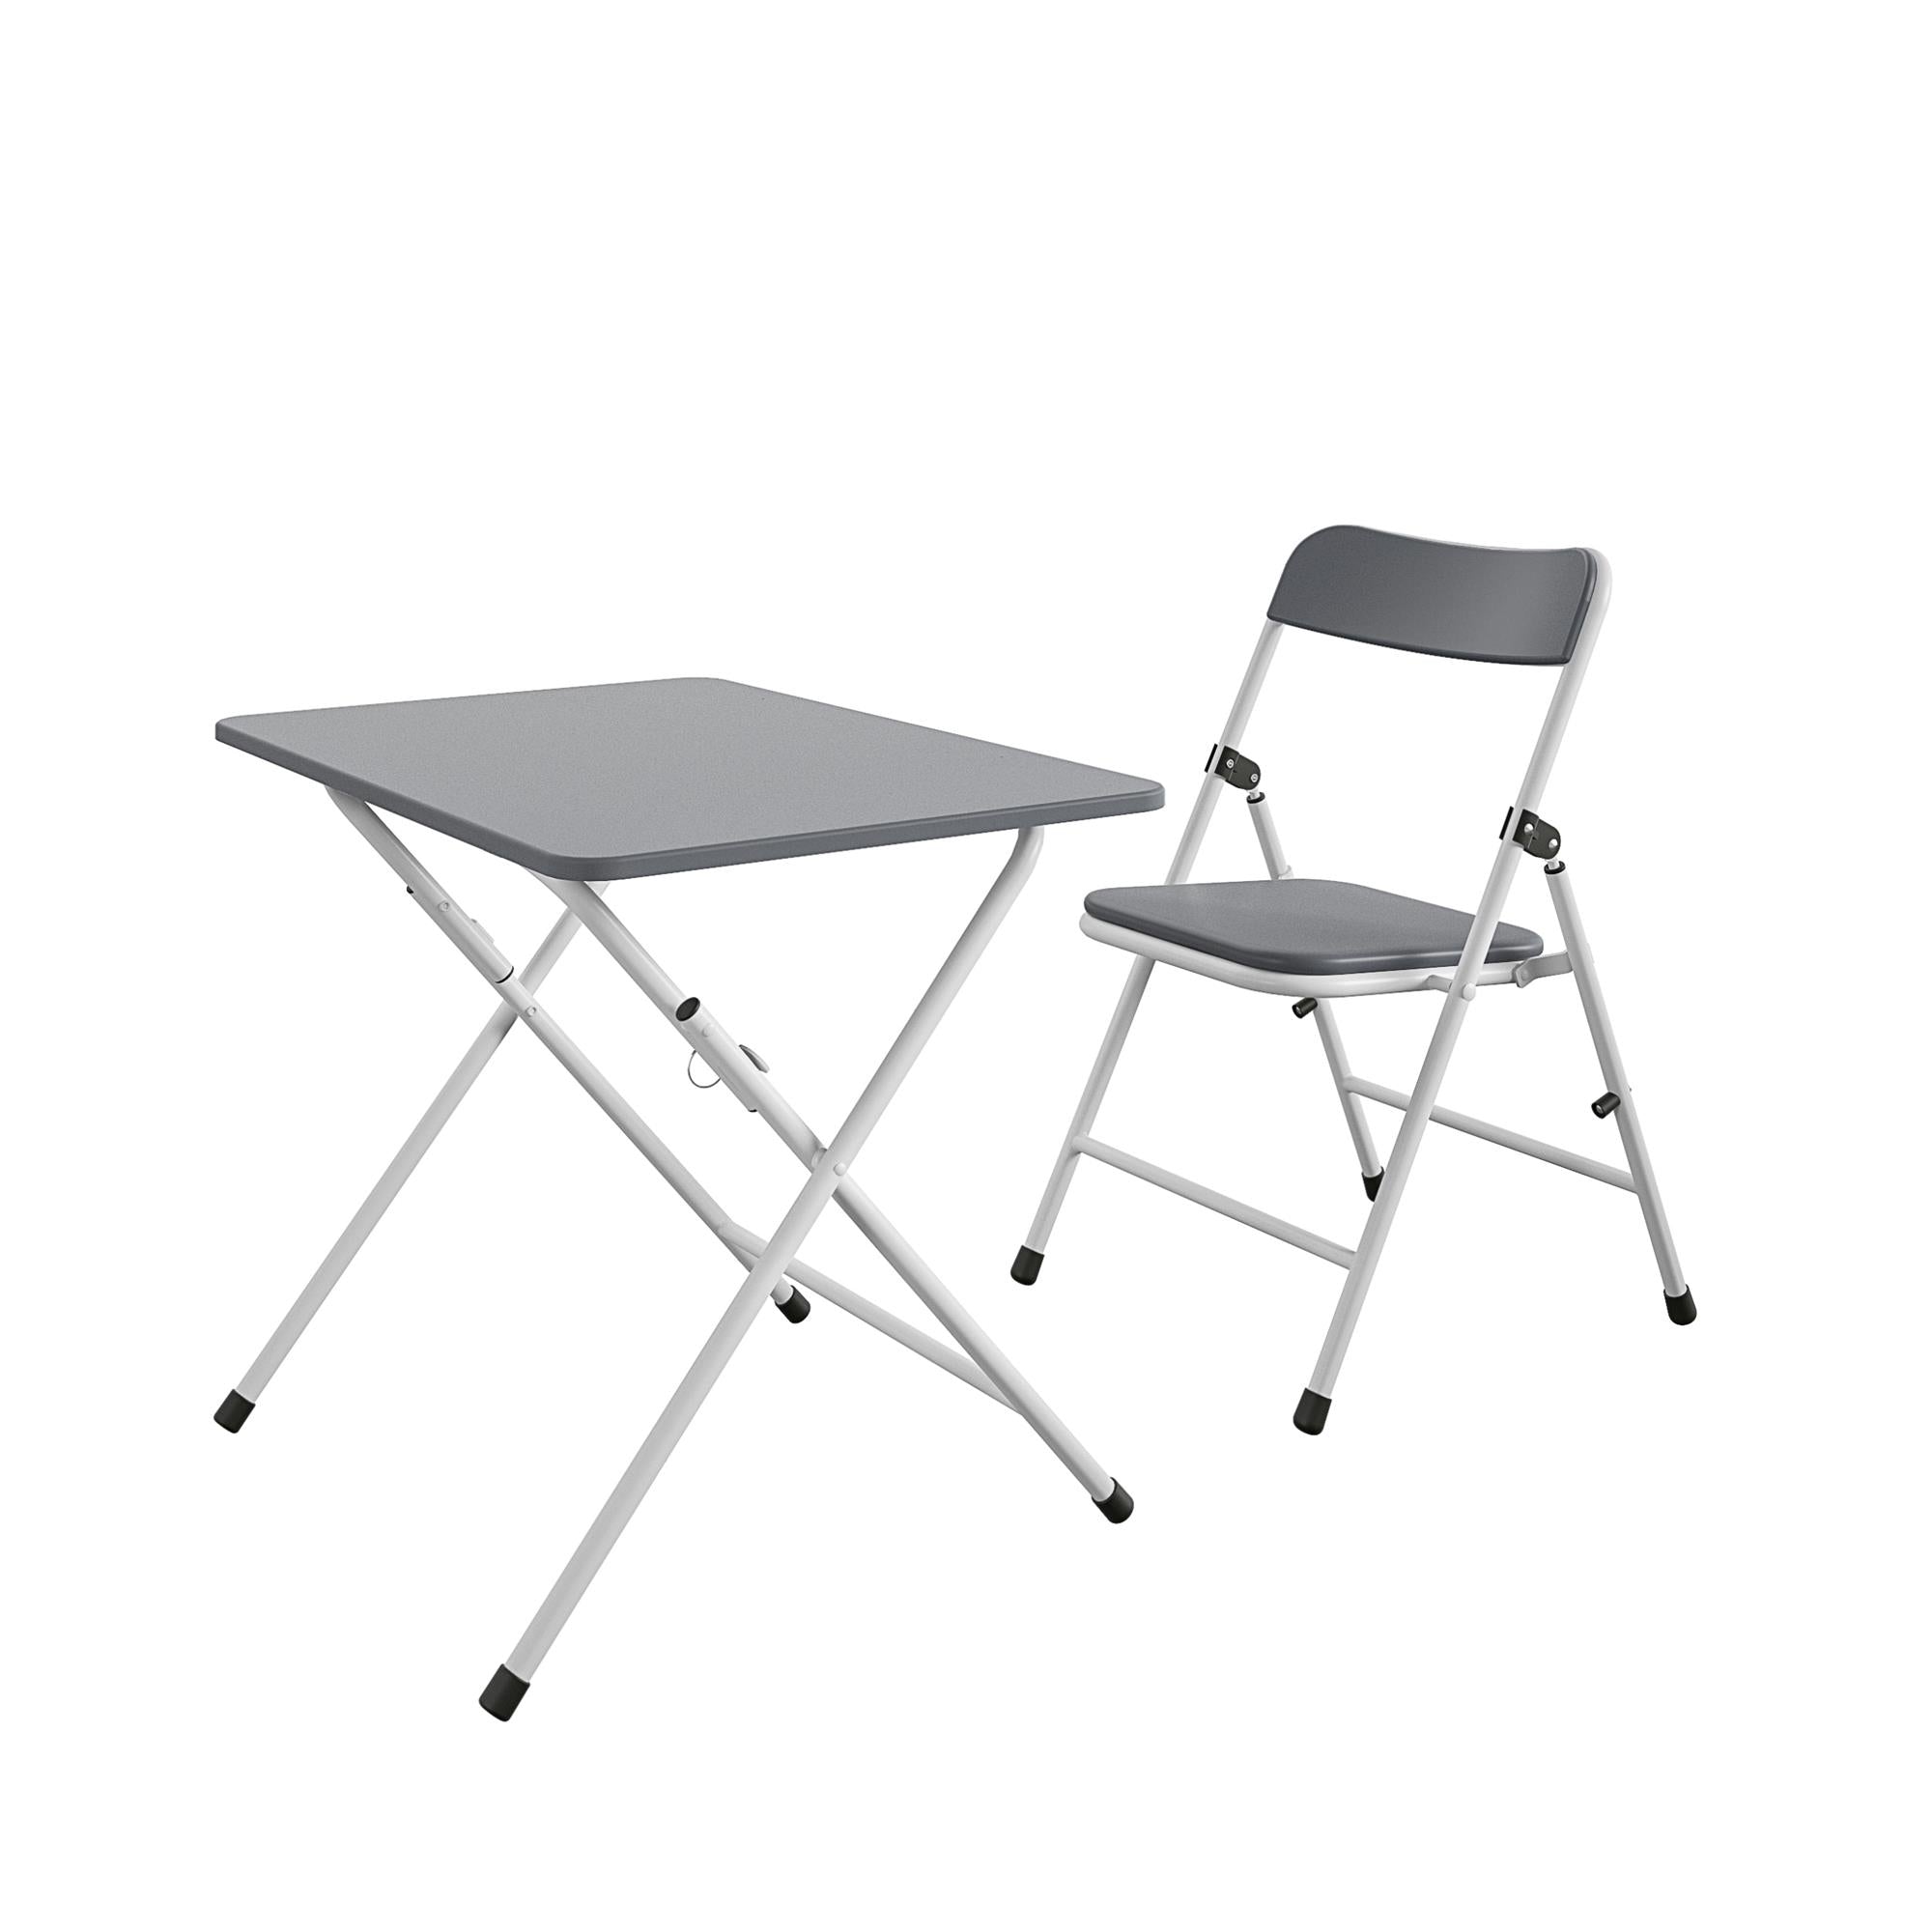 Kid's 2-Piece Table & Chair Activity Set - Cool Gray - N/A